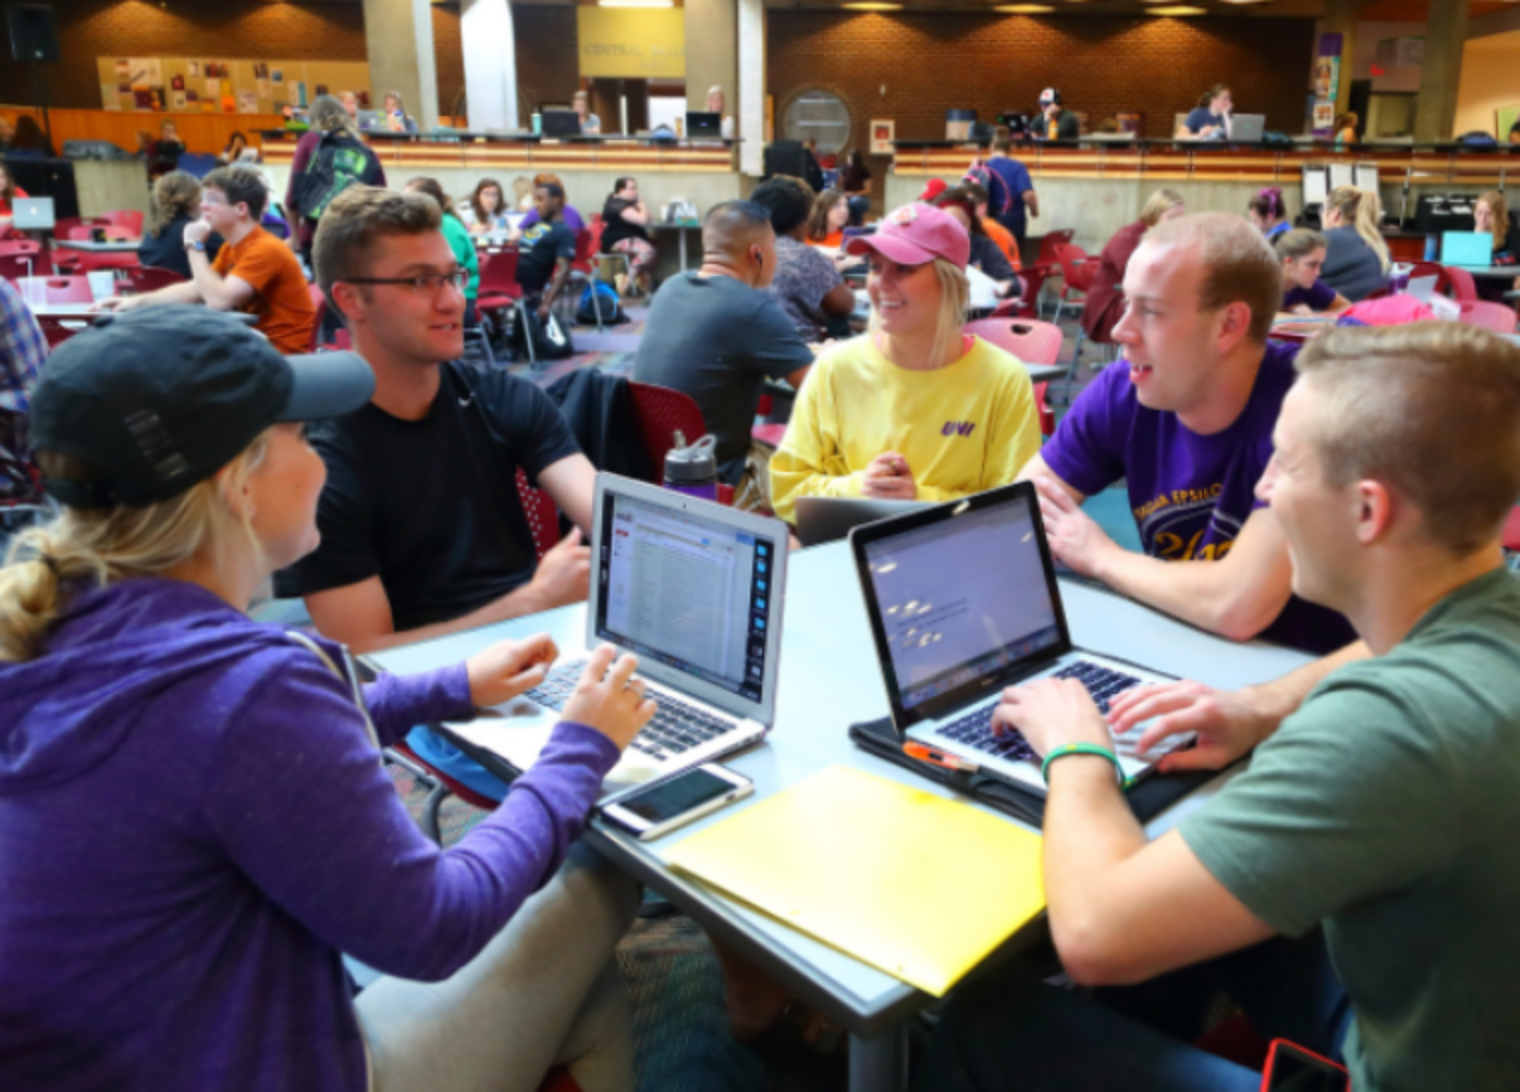 Students in the union